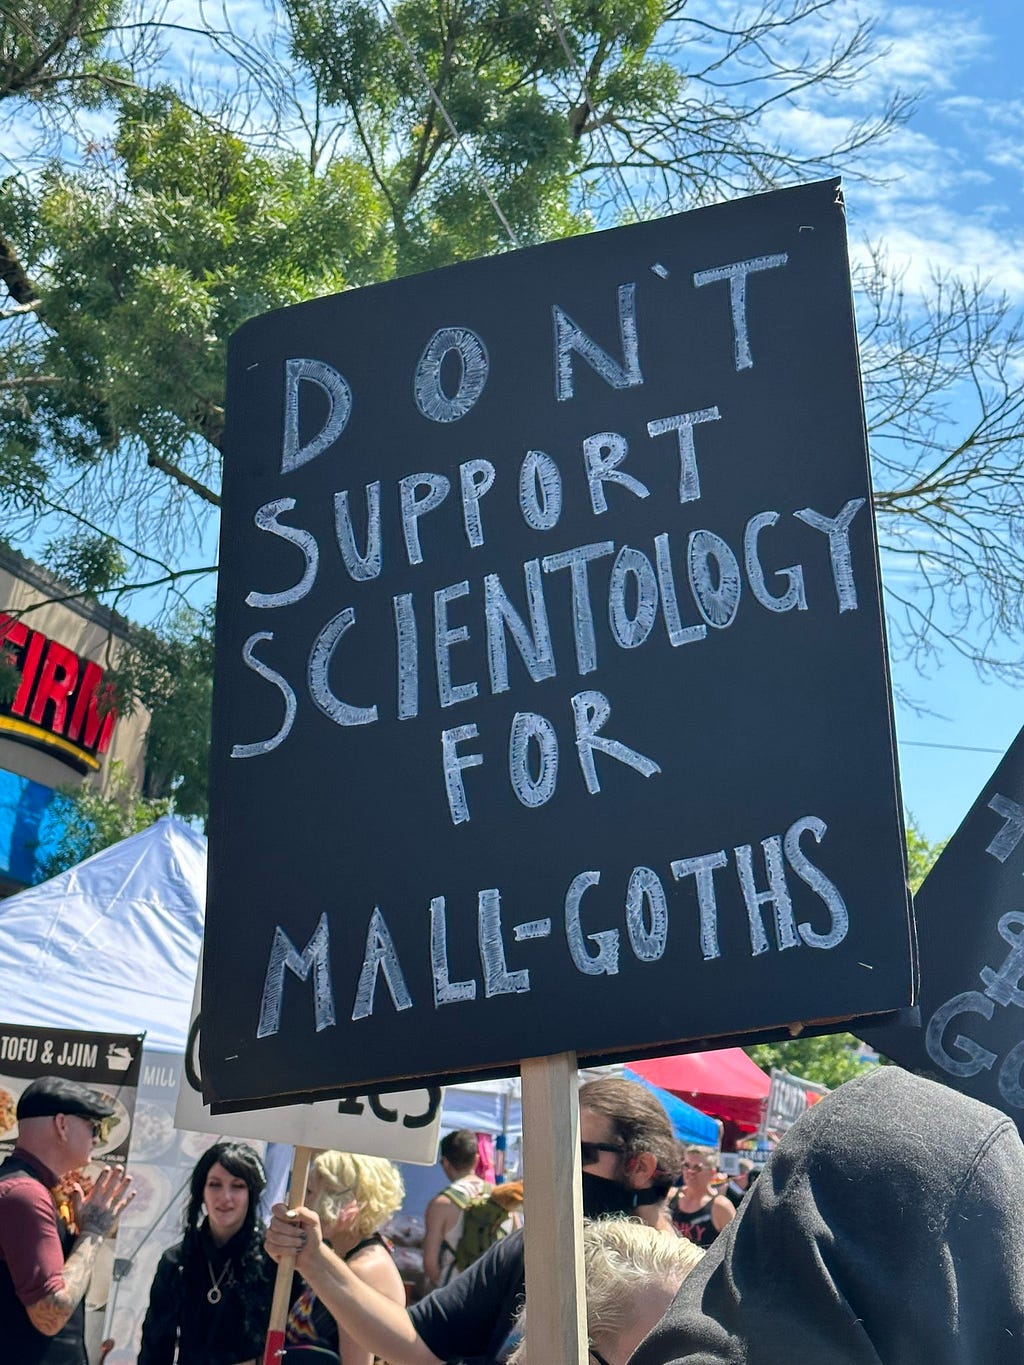 Picket sign at festival that says “Don’t support Scientology for Mall Goths“